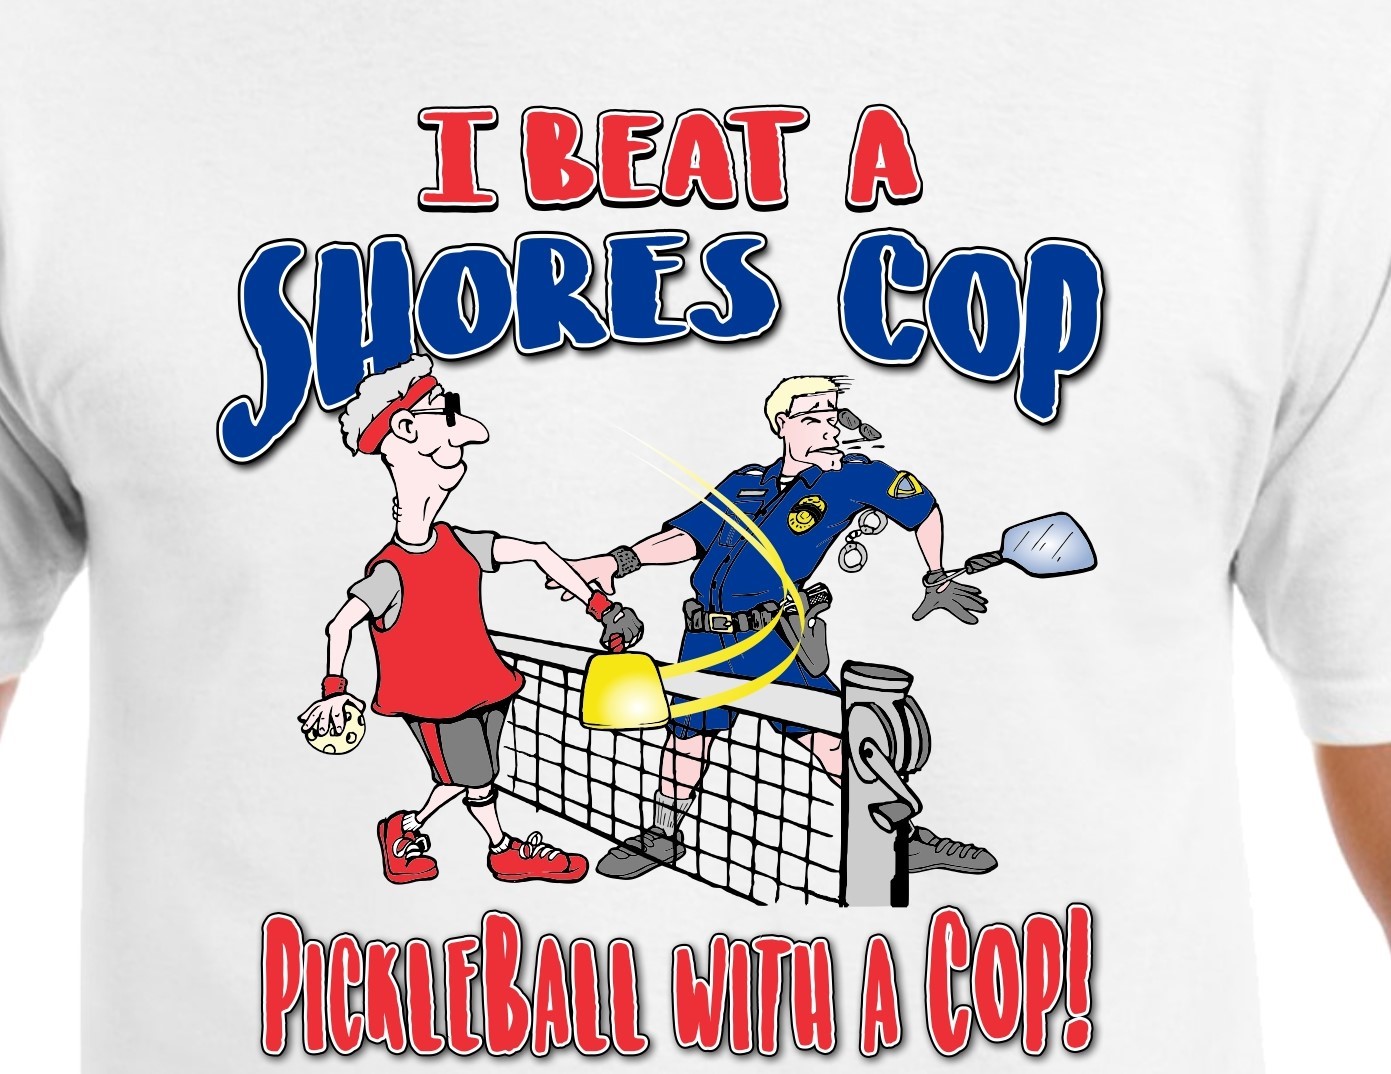 Daytona Beach Shores To Host 1st Ever Pickleball With A Cop Image